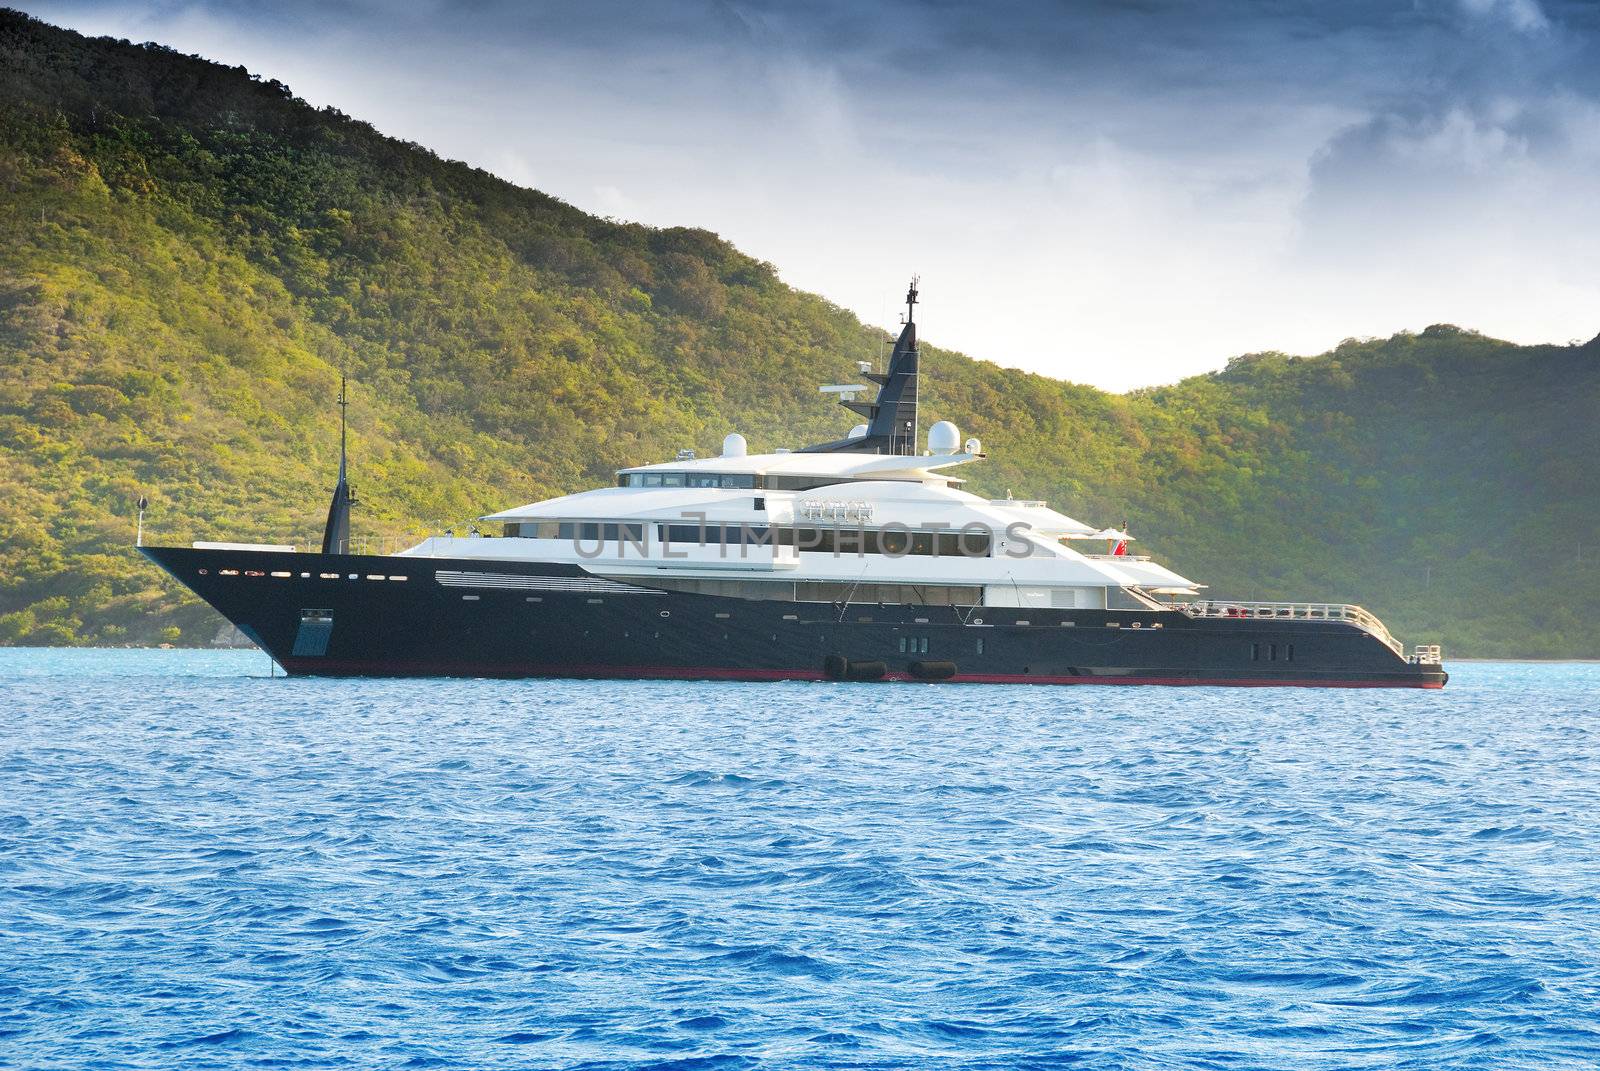 Luxury yacht at anchor in the caribbean BVI islands